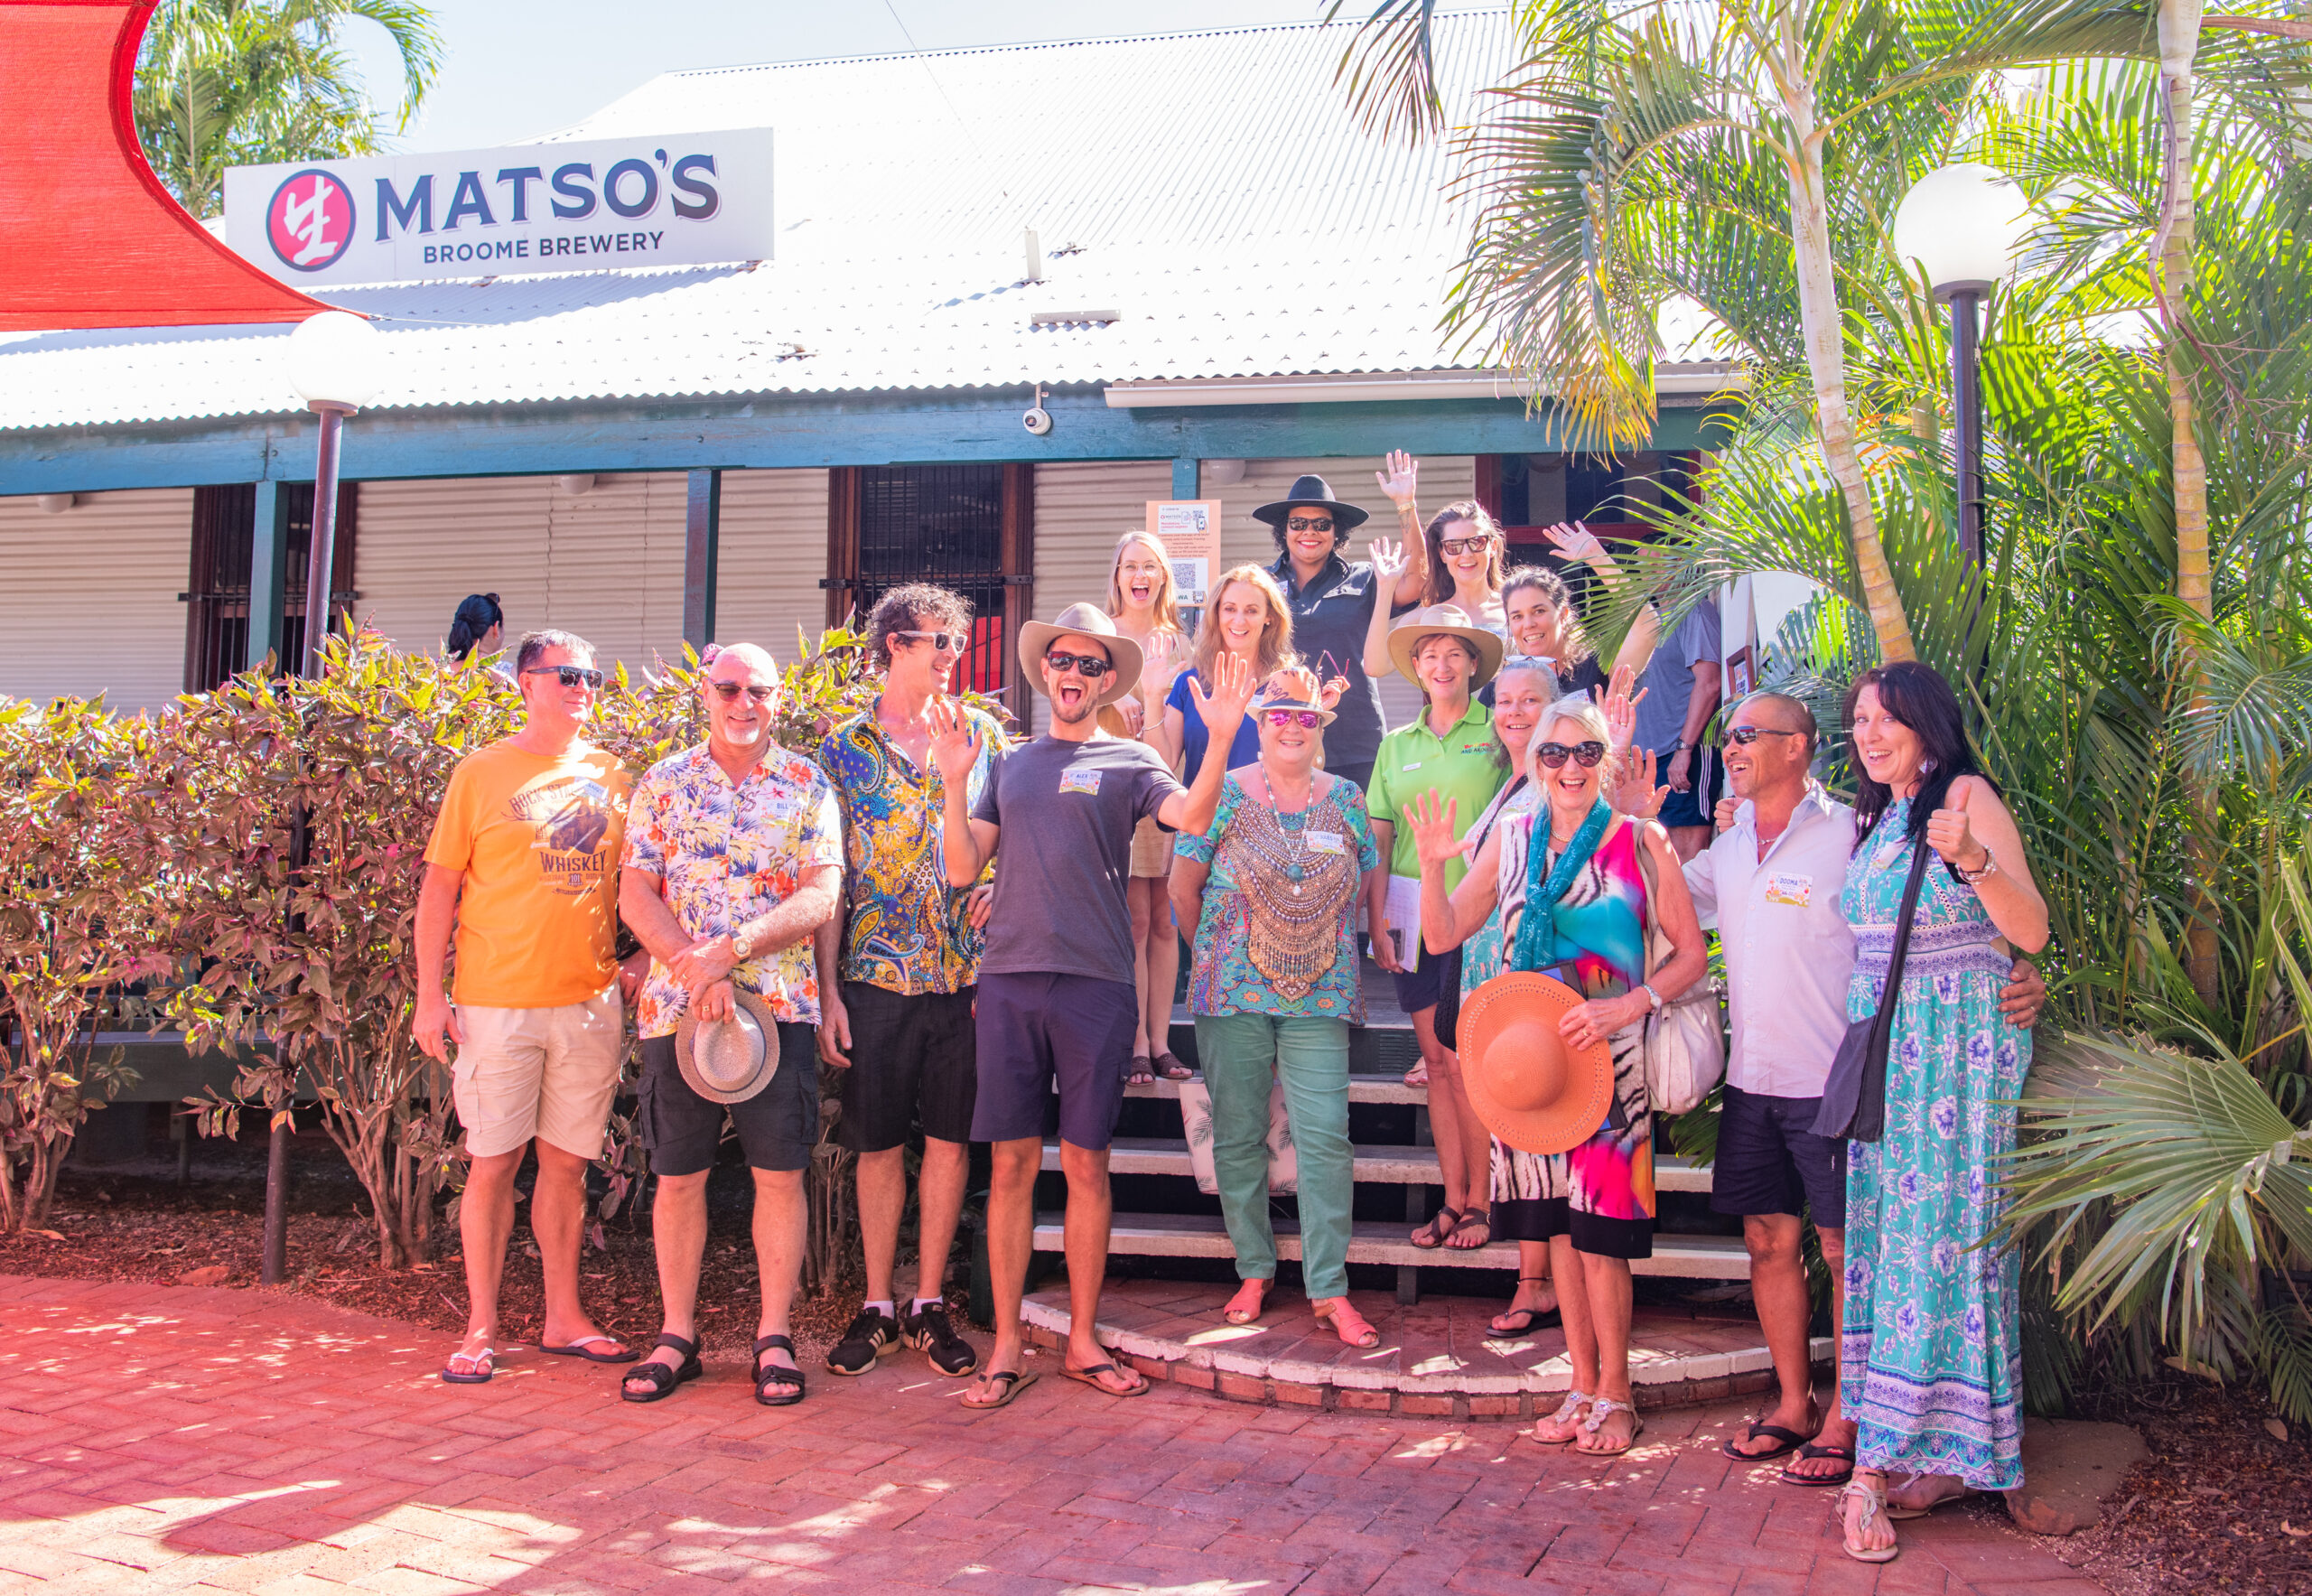 Broome and Around SPECIAL :  Broome 3 in 1 Iconic Afternoon Tour - Matso's Broome Brewery,  Broome Museum , Malcolm Douglas Crocodile Tour